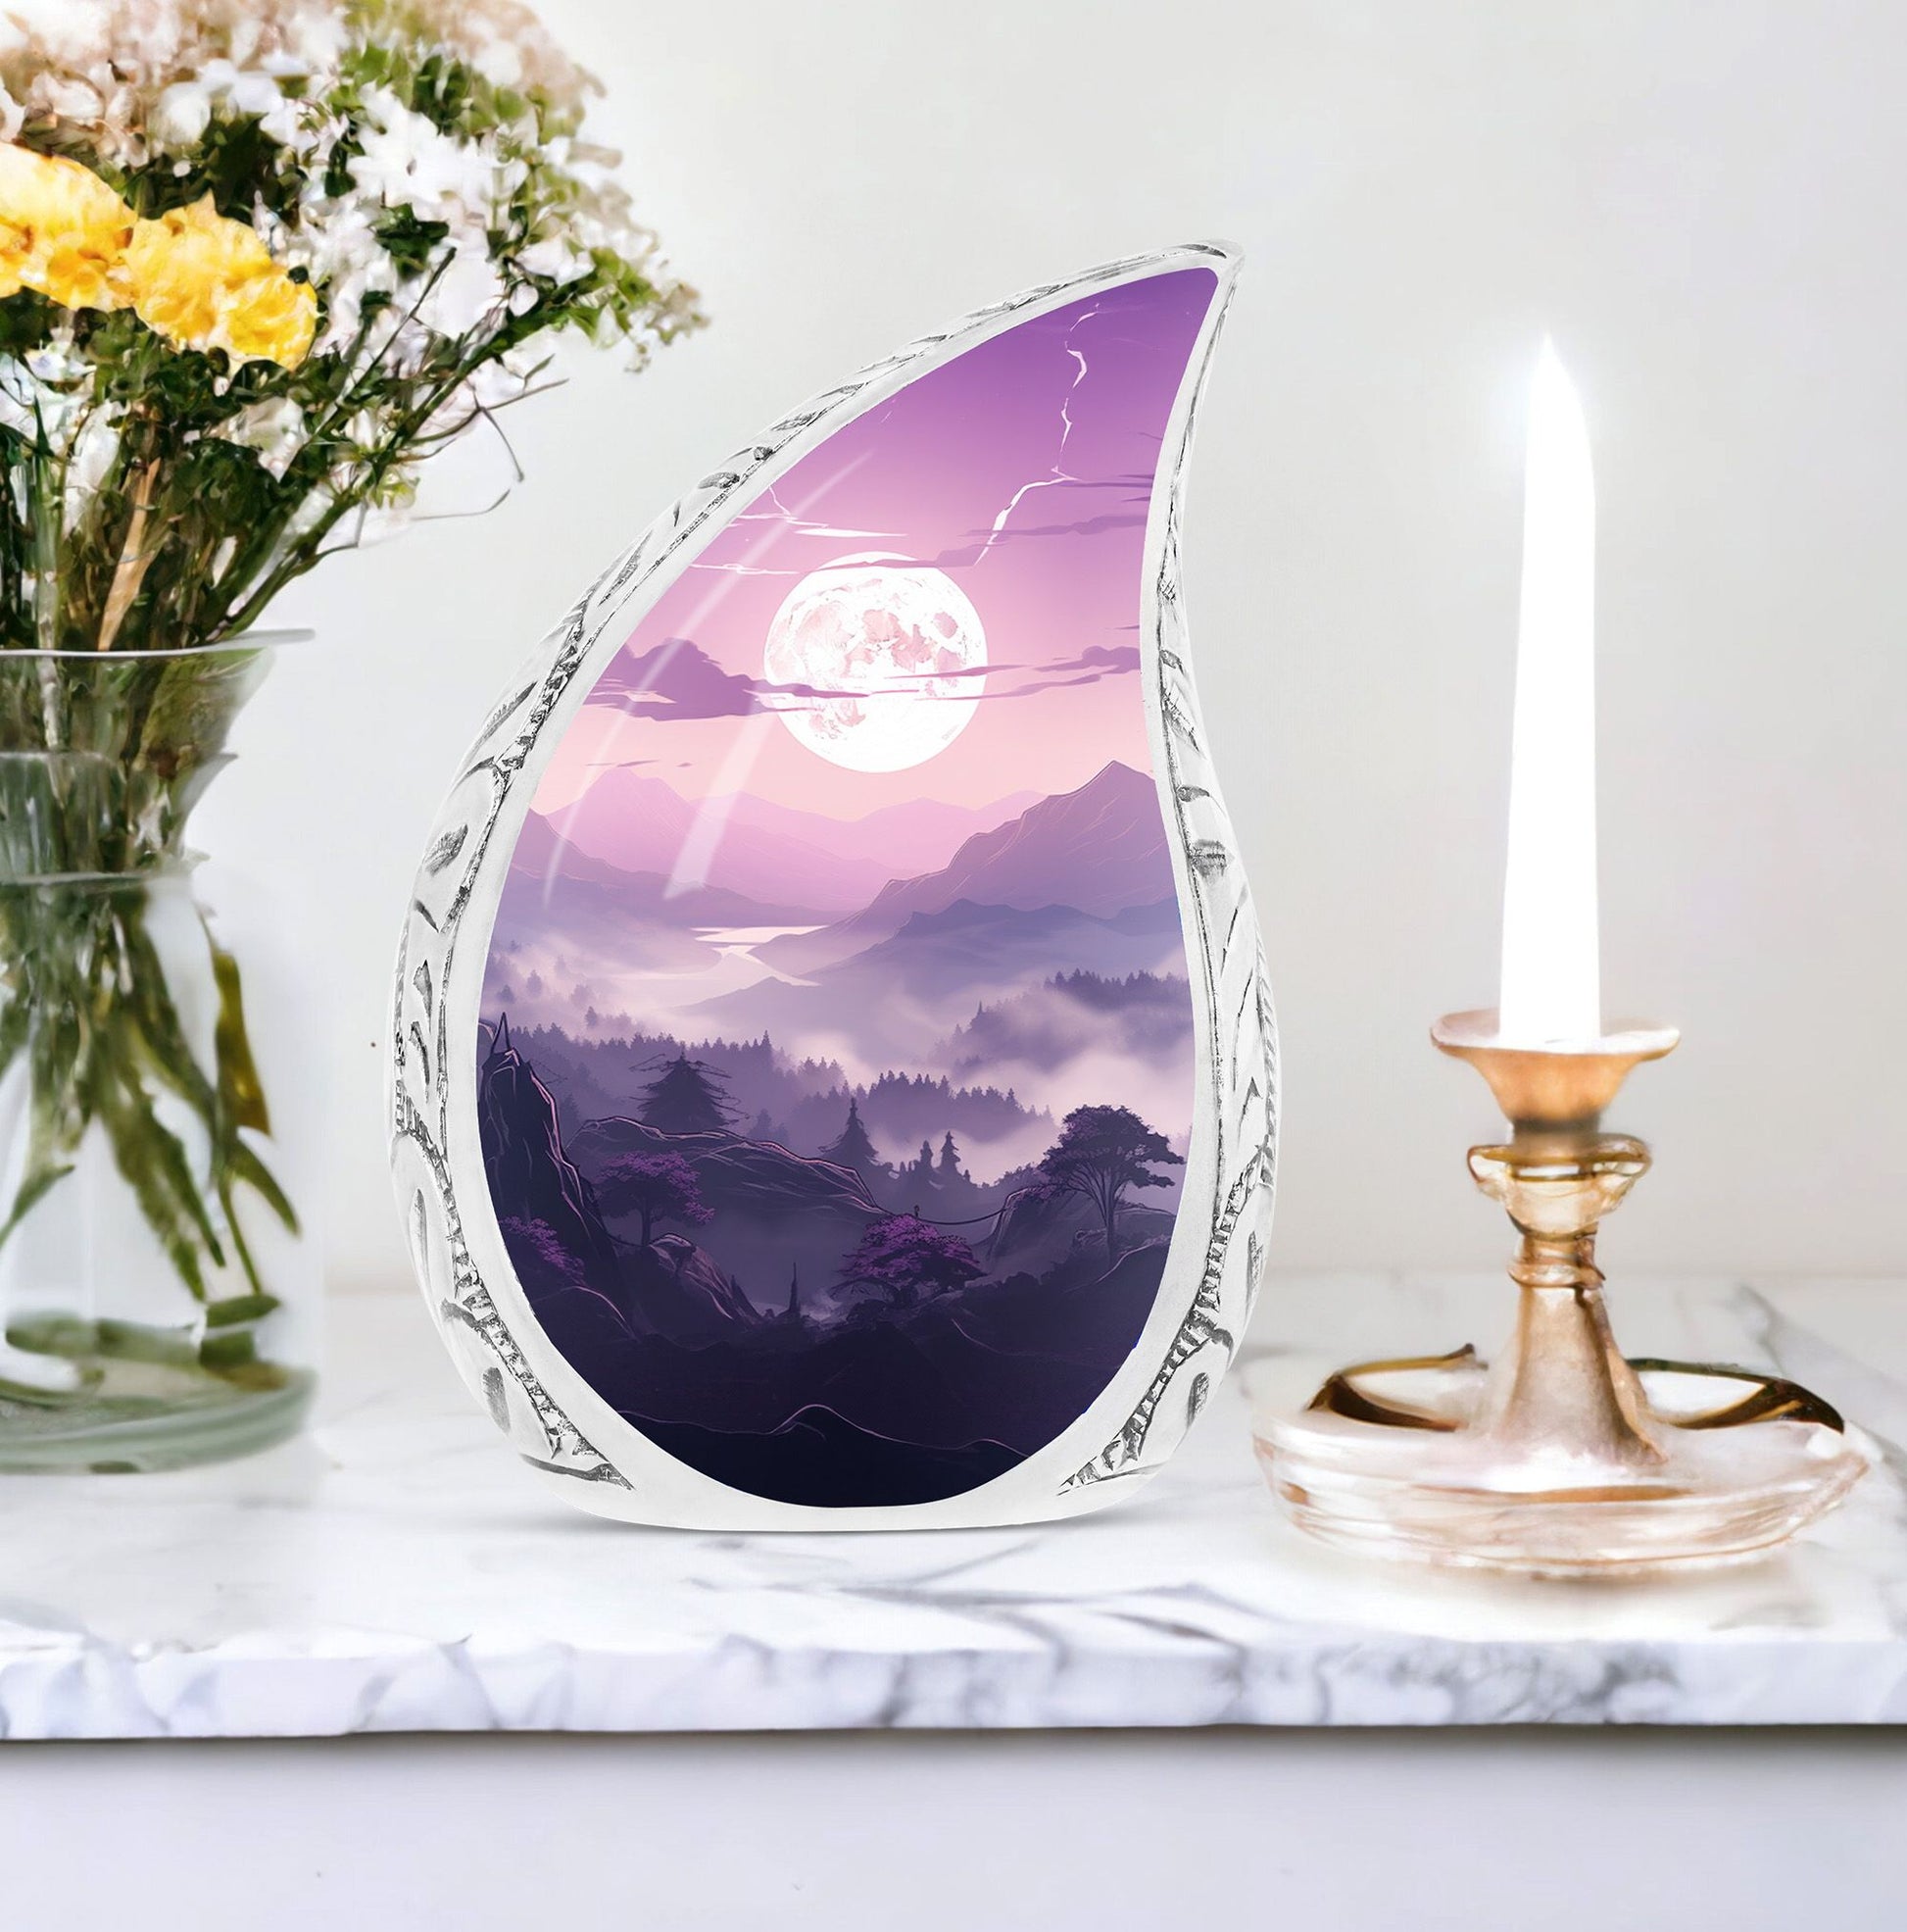 Teardrop cremation urn themed with mountains, ideal for storing dad's ashes. Suitable as a small funeral urn.